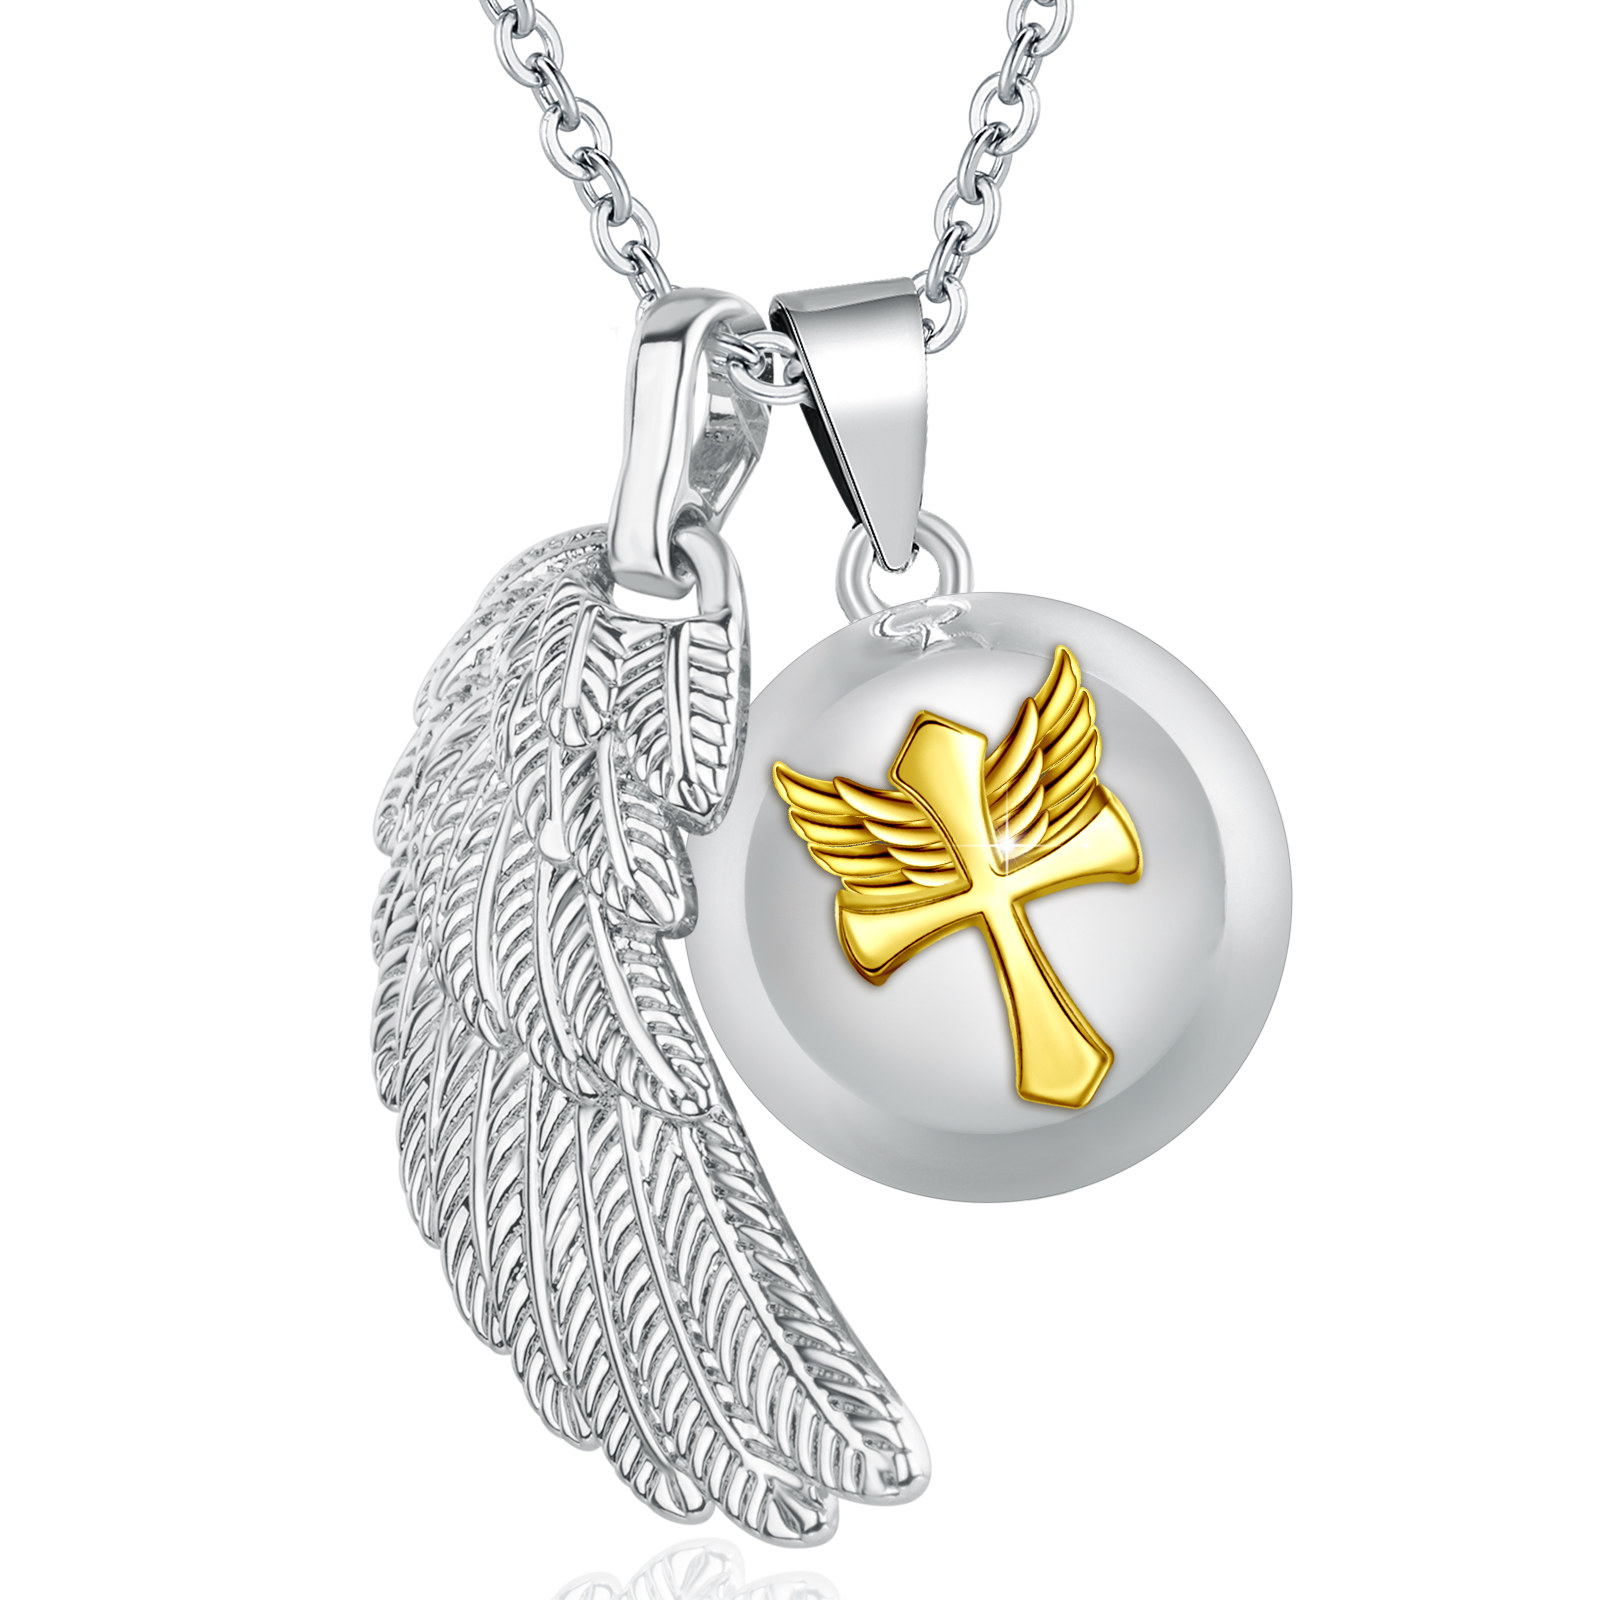 Merryshine Jewelry New Product Angel Wings Cross Mexican Bola Necklace For Pregnancy